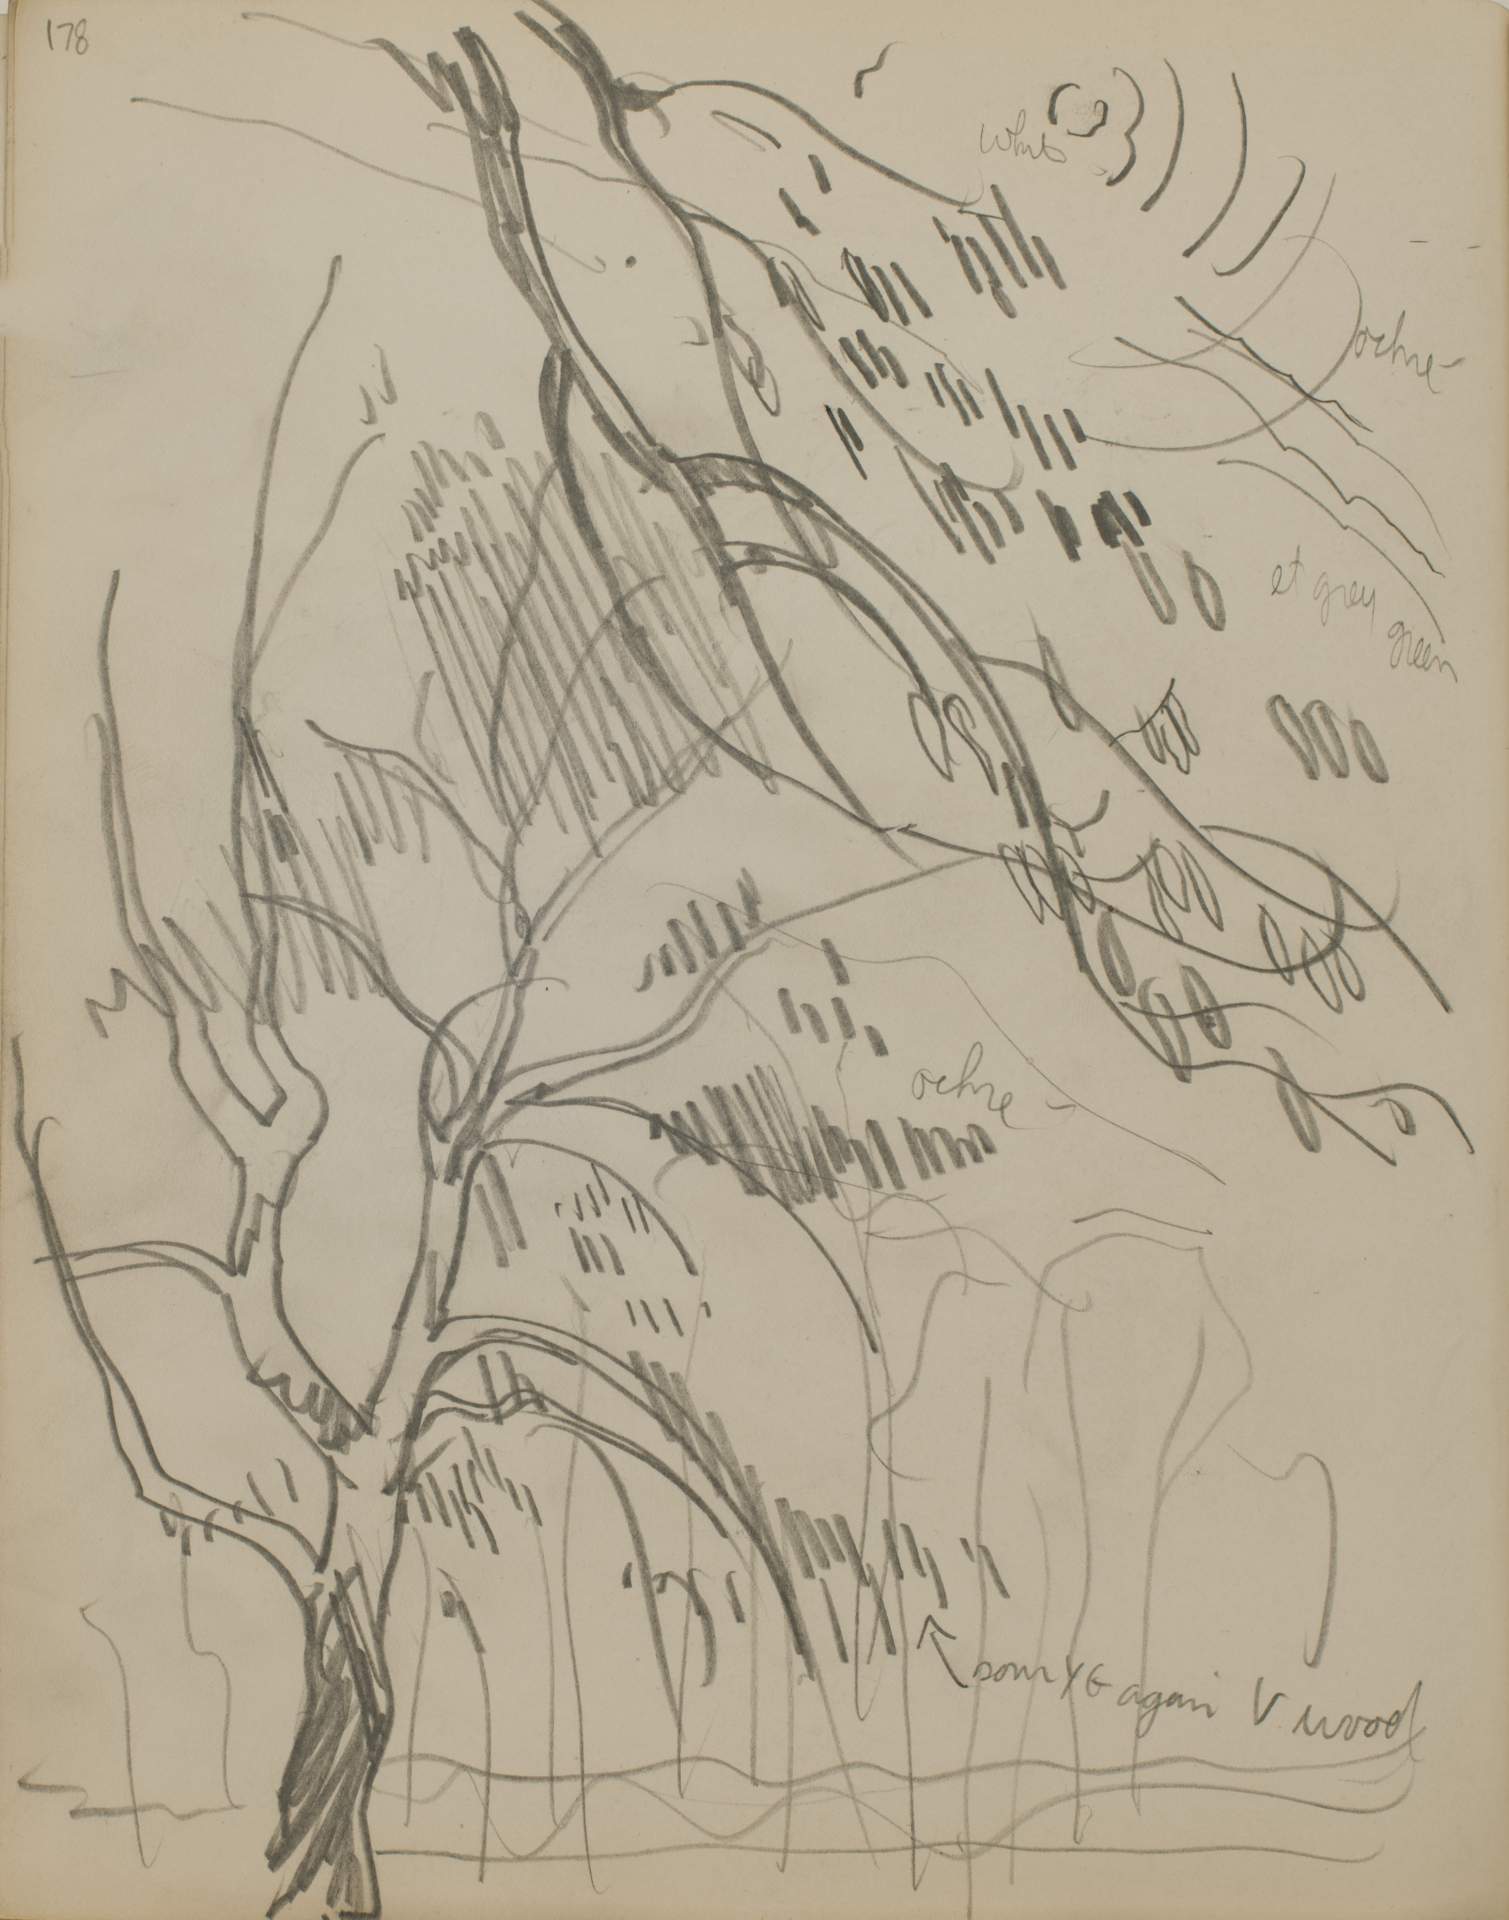 Untitled (sketch of a forest)